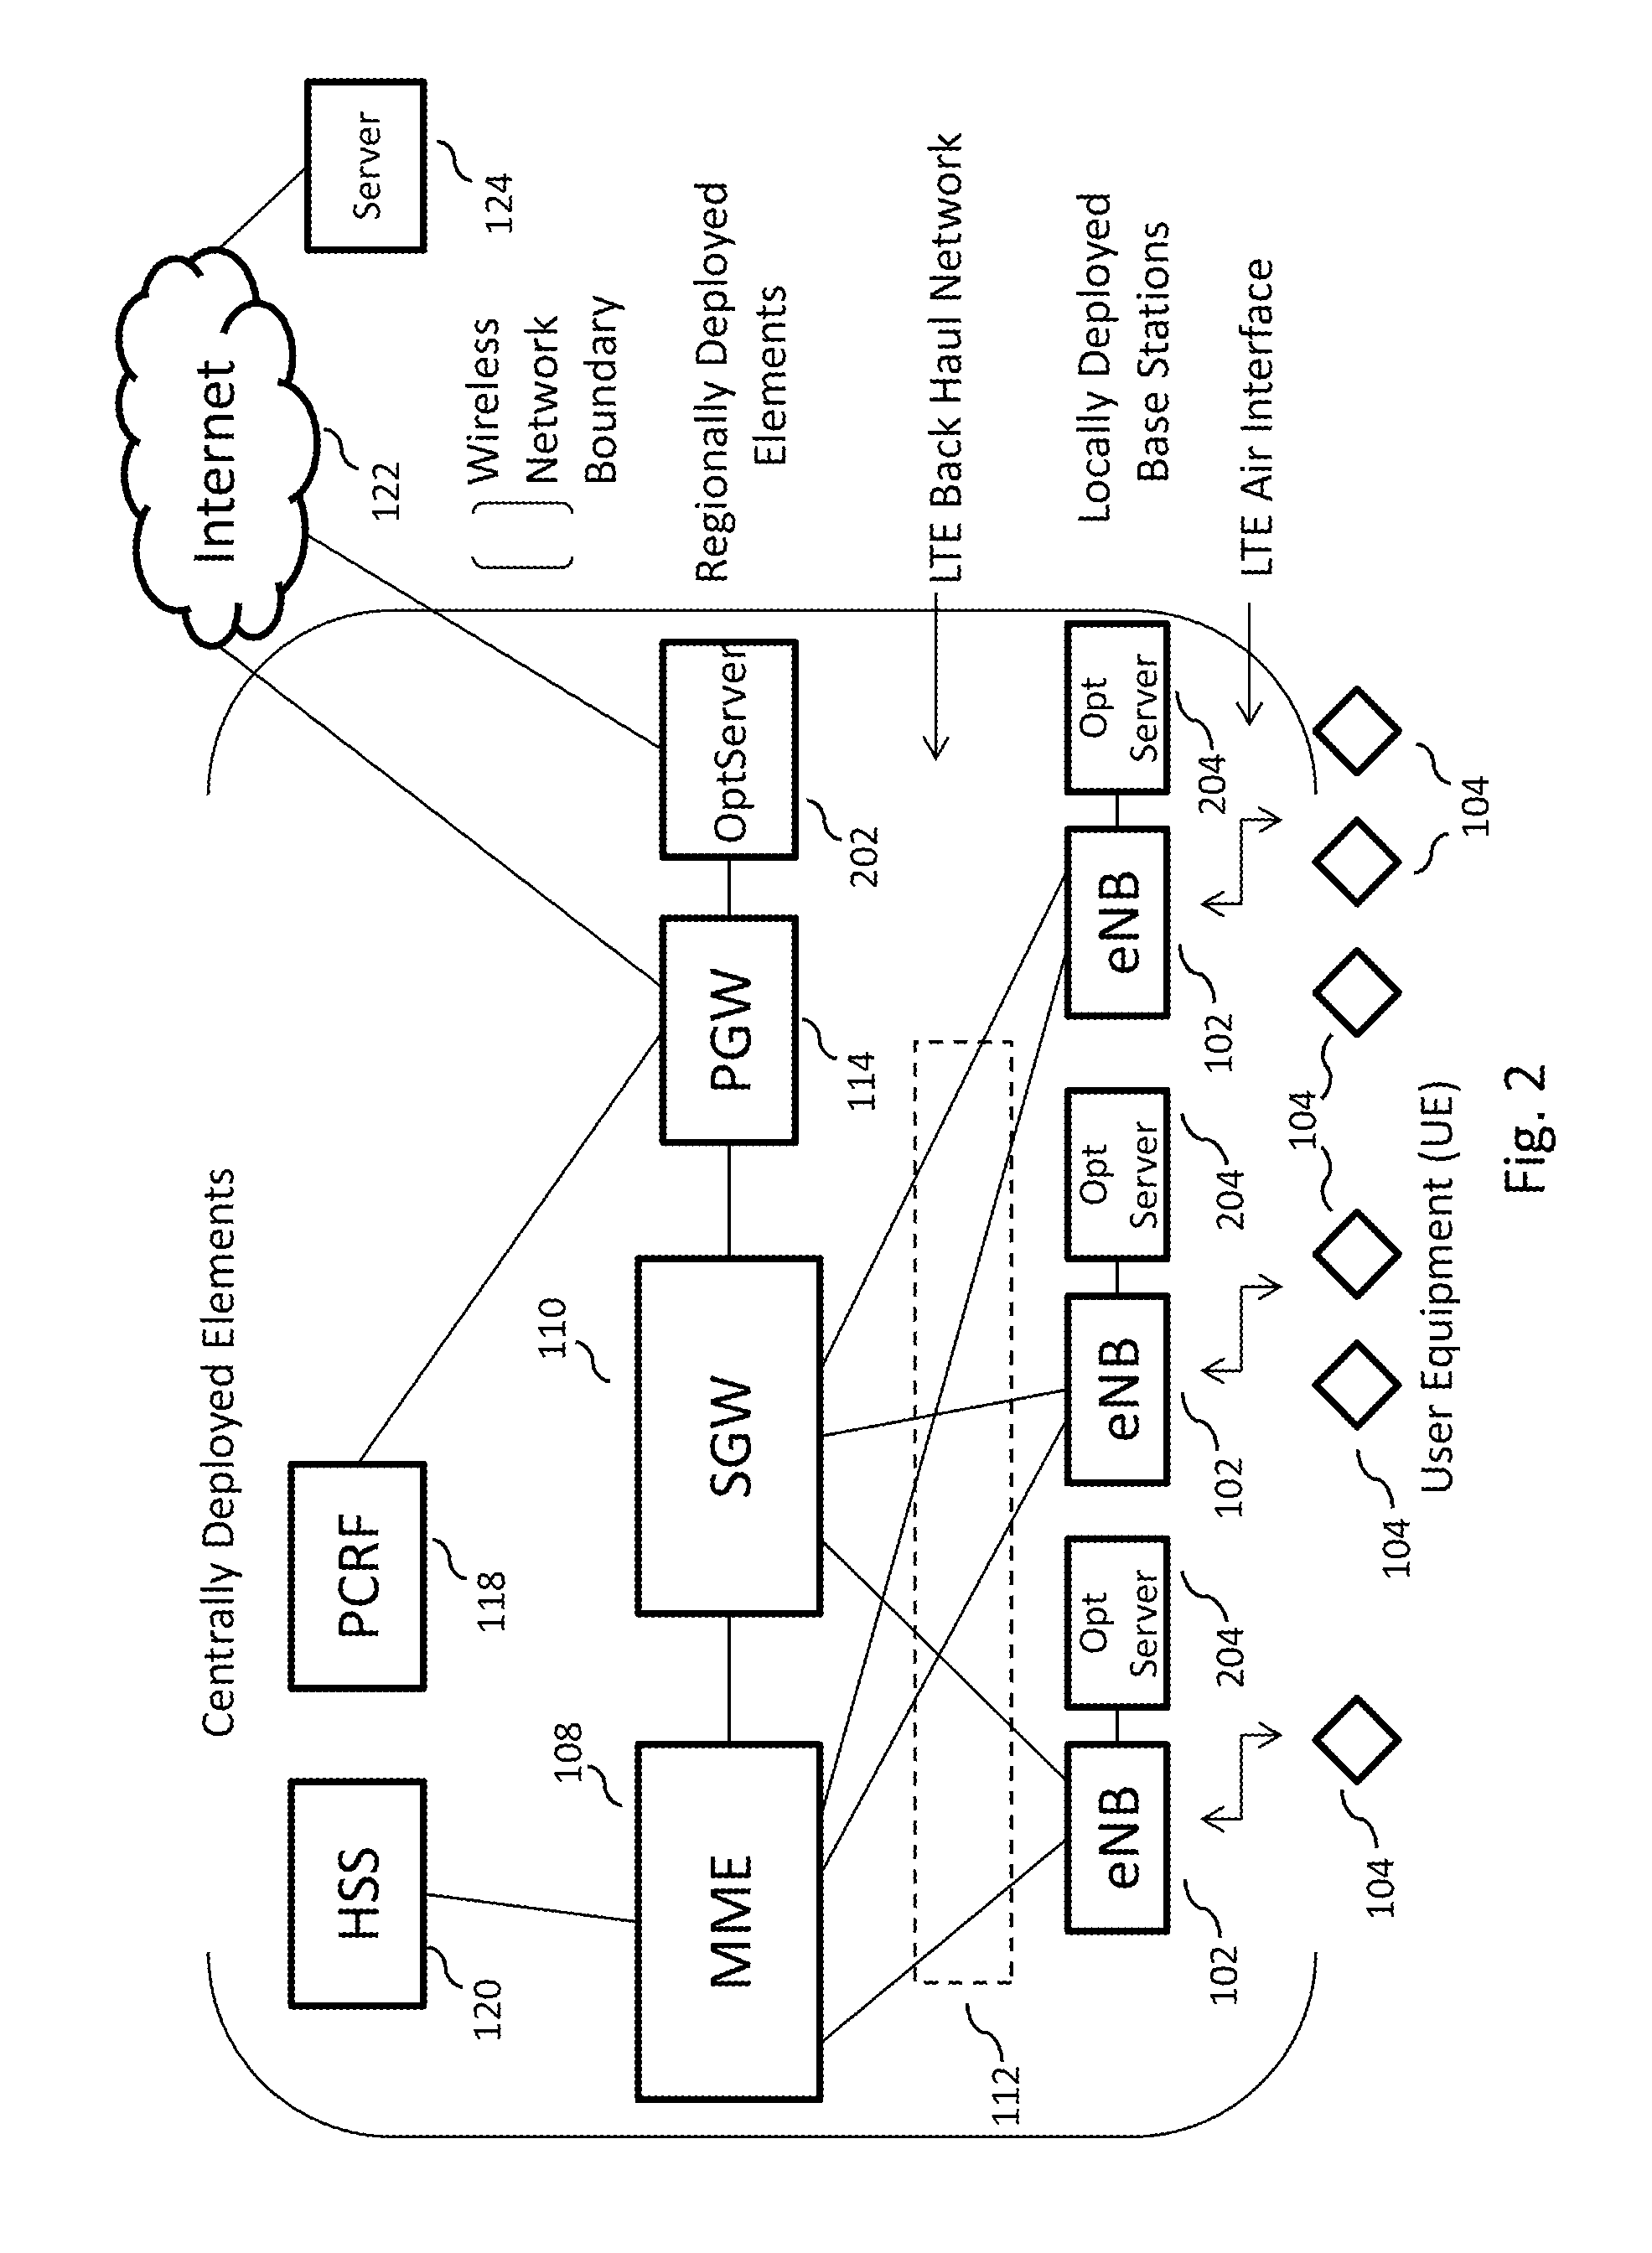 Wireless network based sensor data collection, processing, storage, and distribution